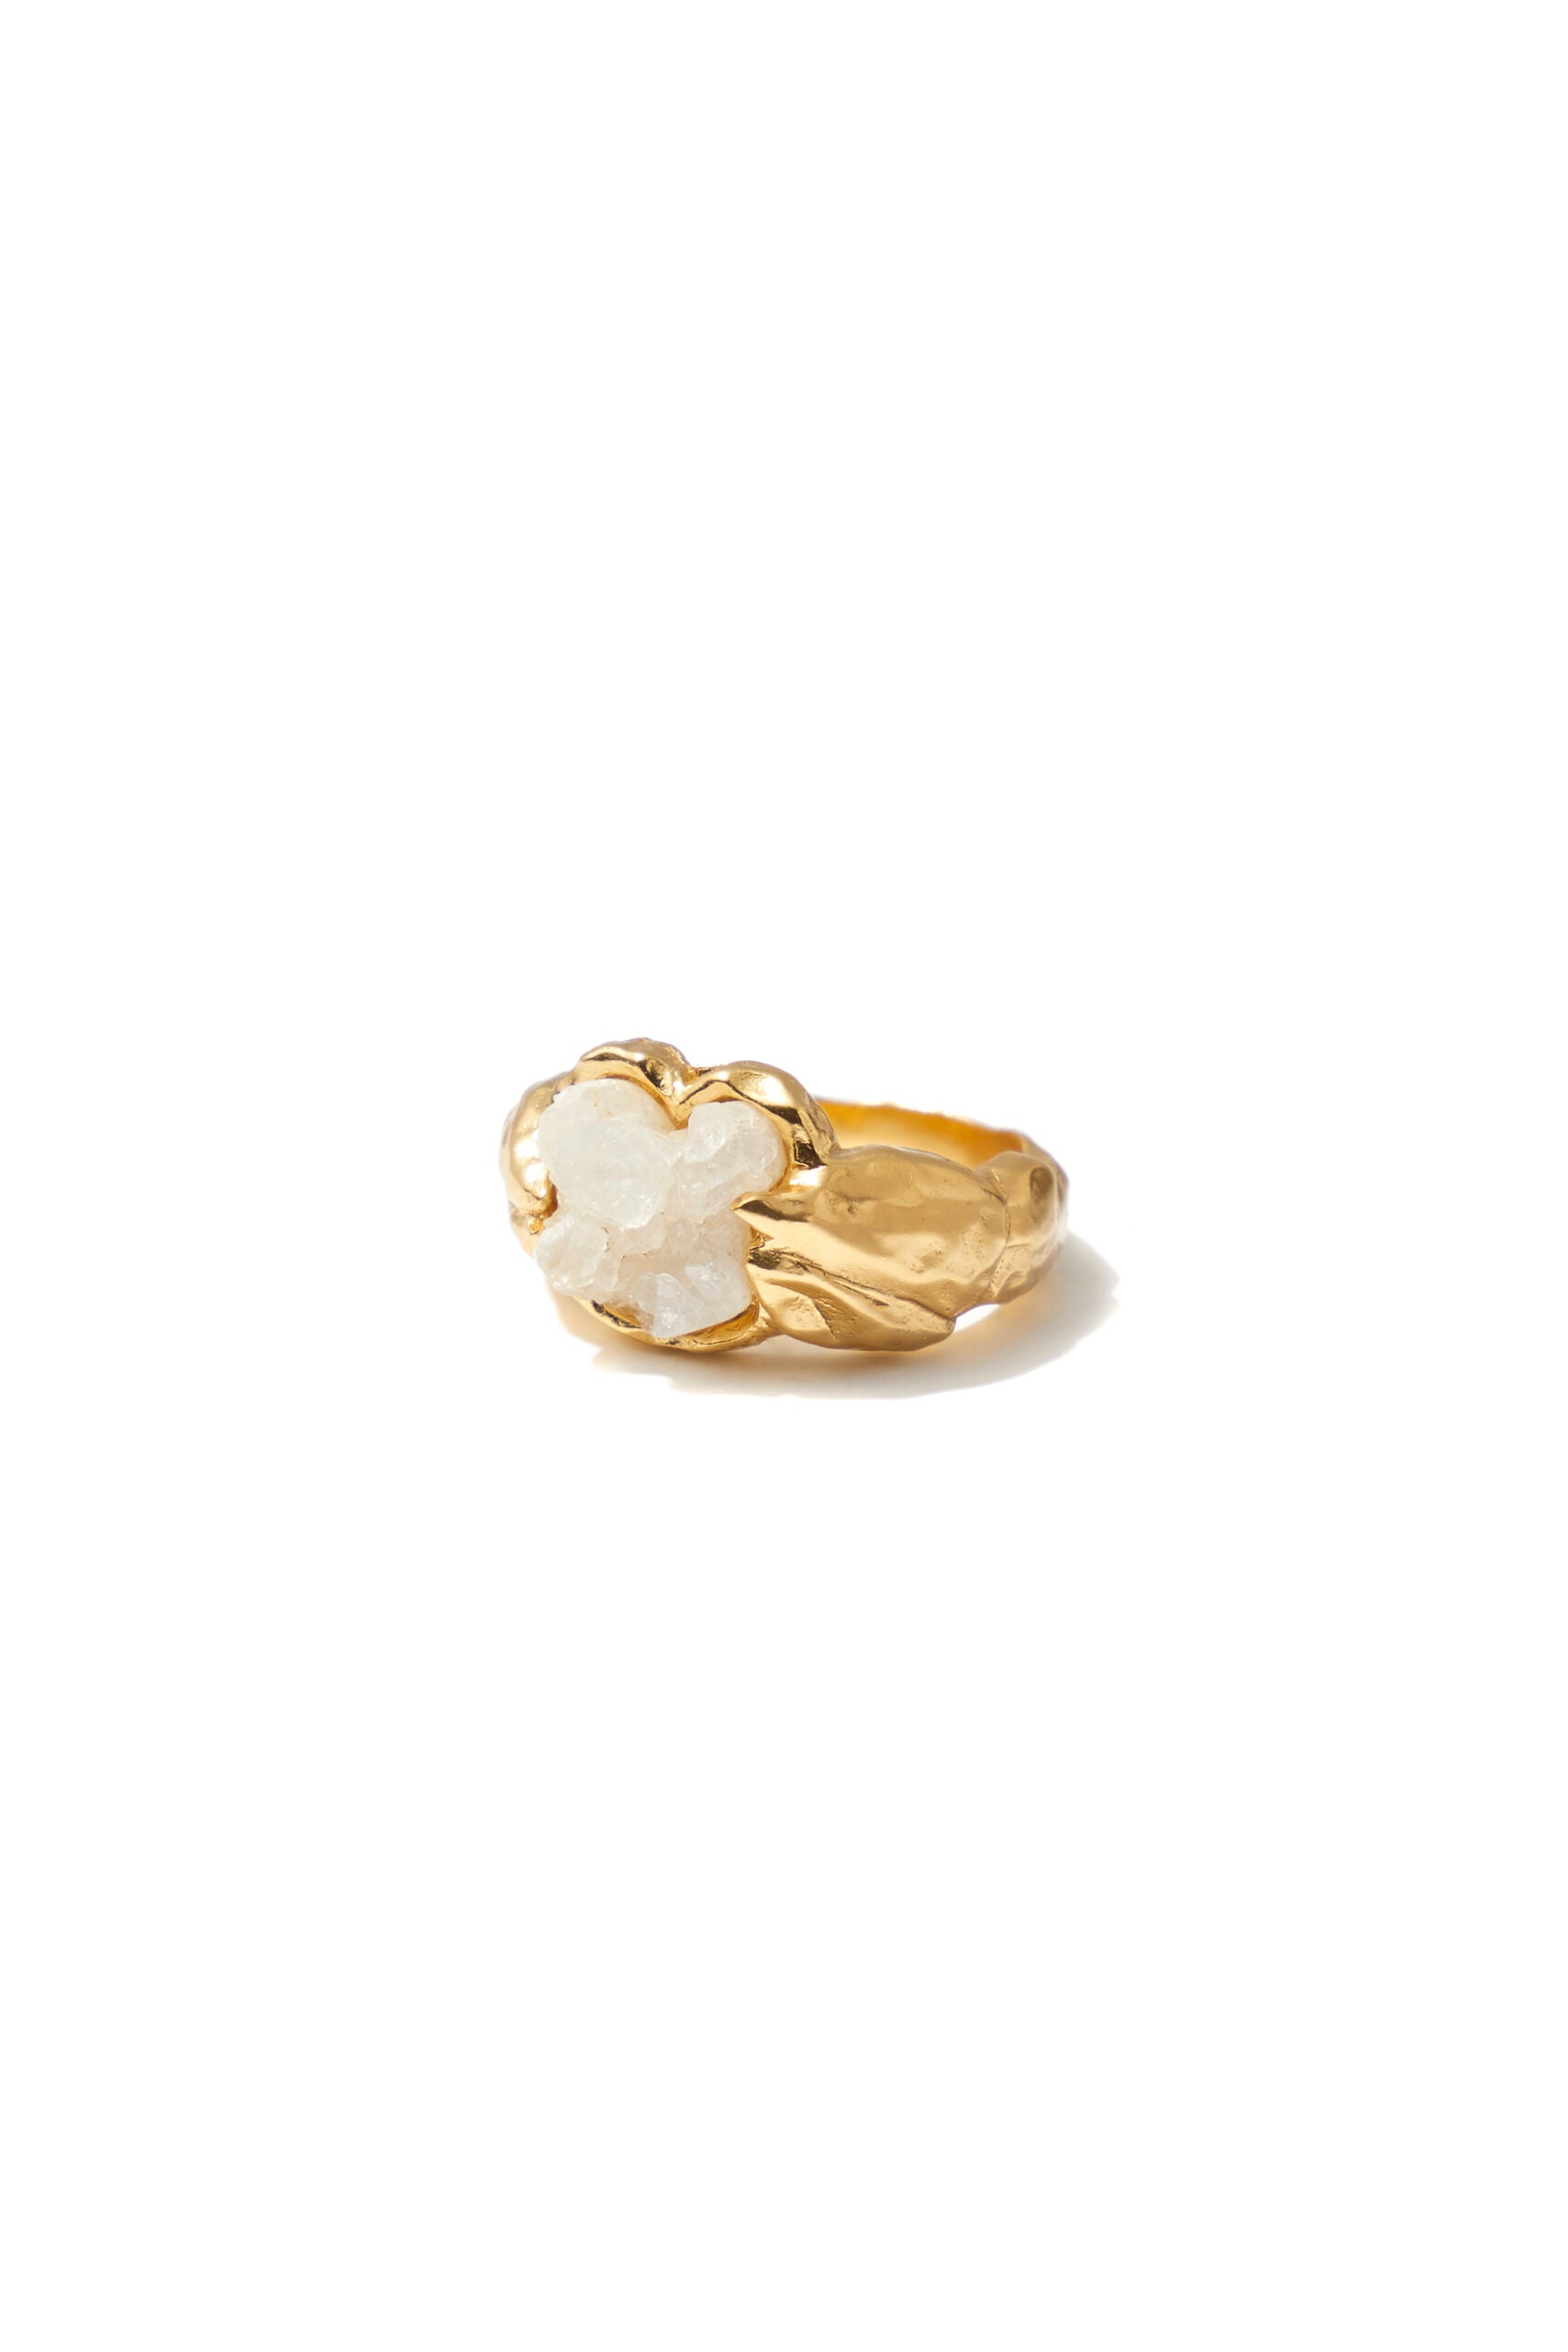 Clementine ring